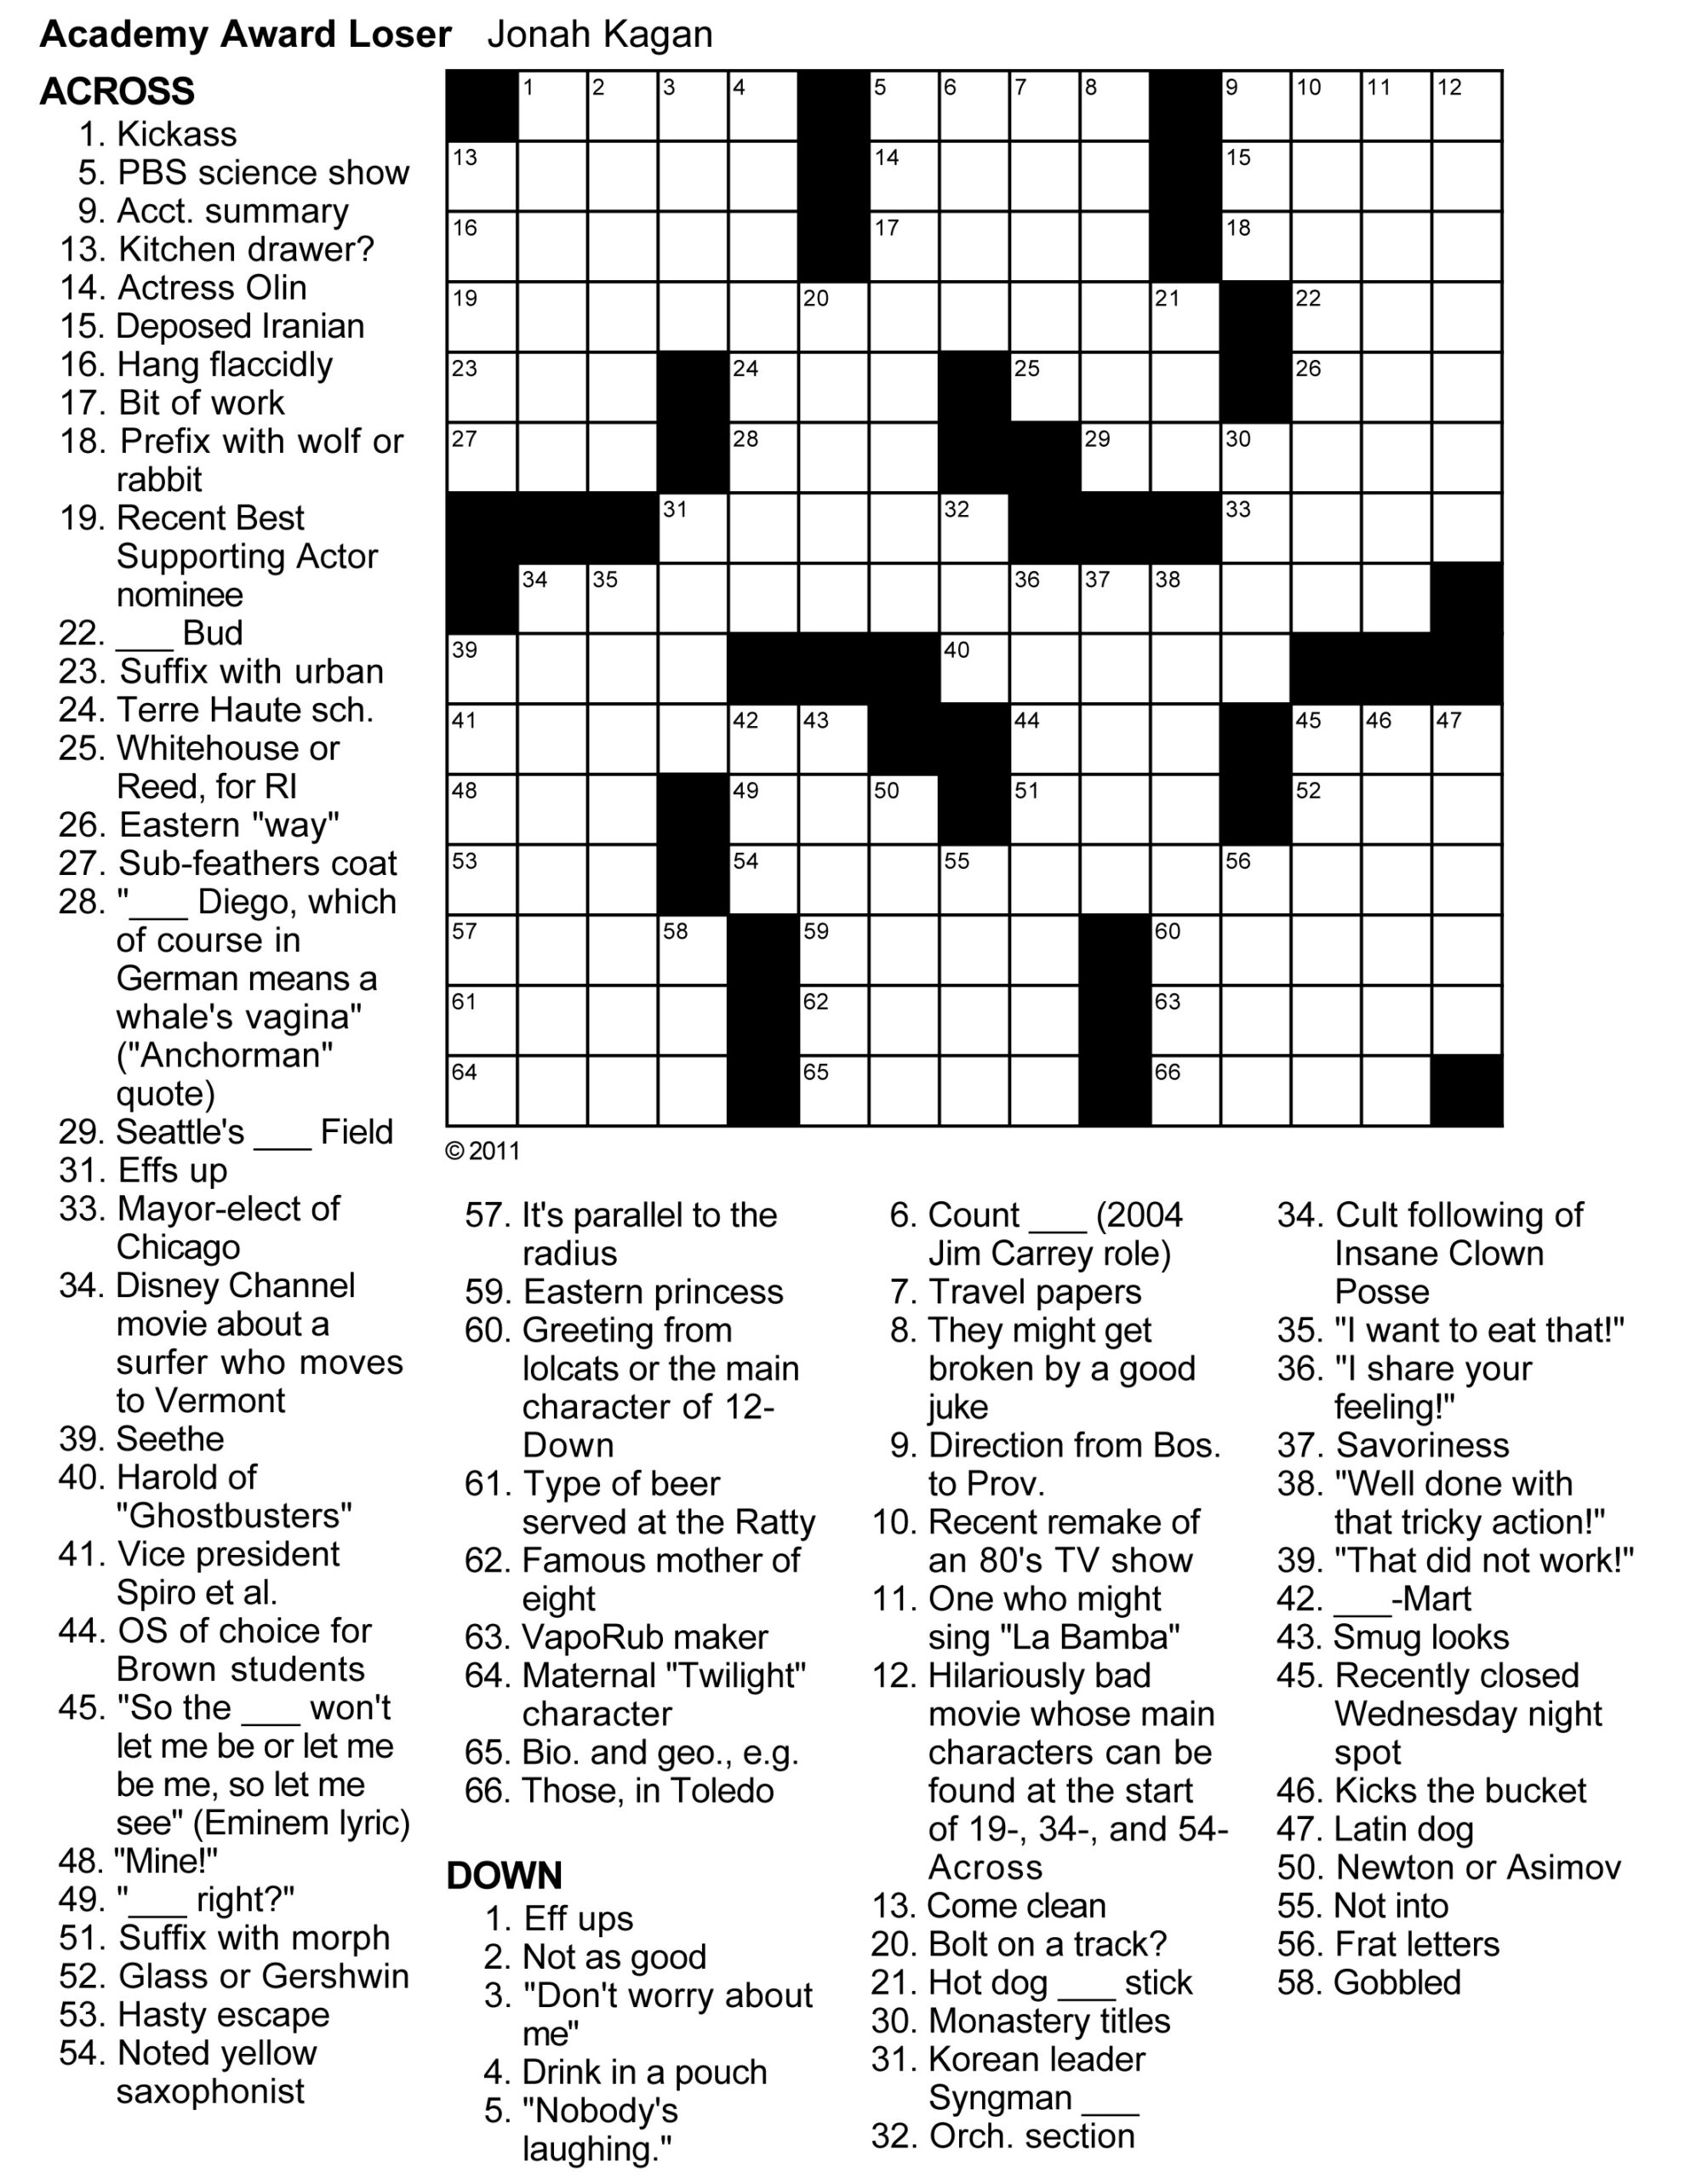 Daily Newspaper Crossword Puzzles To Print